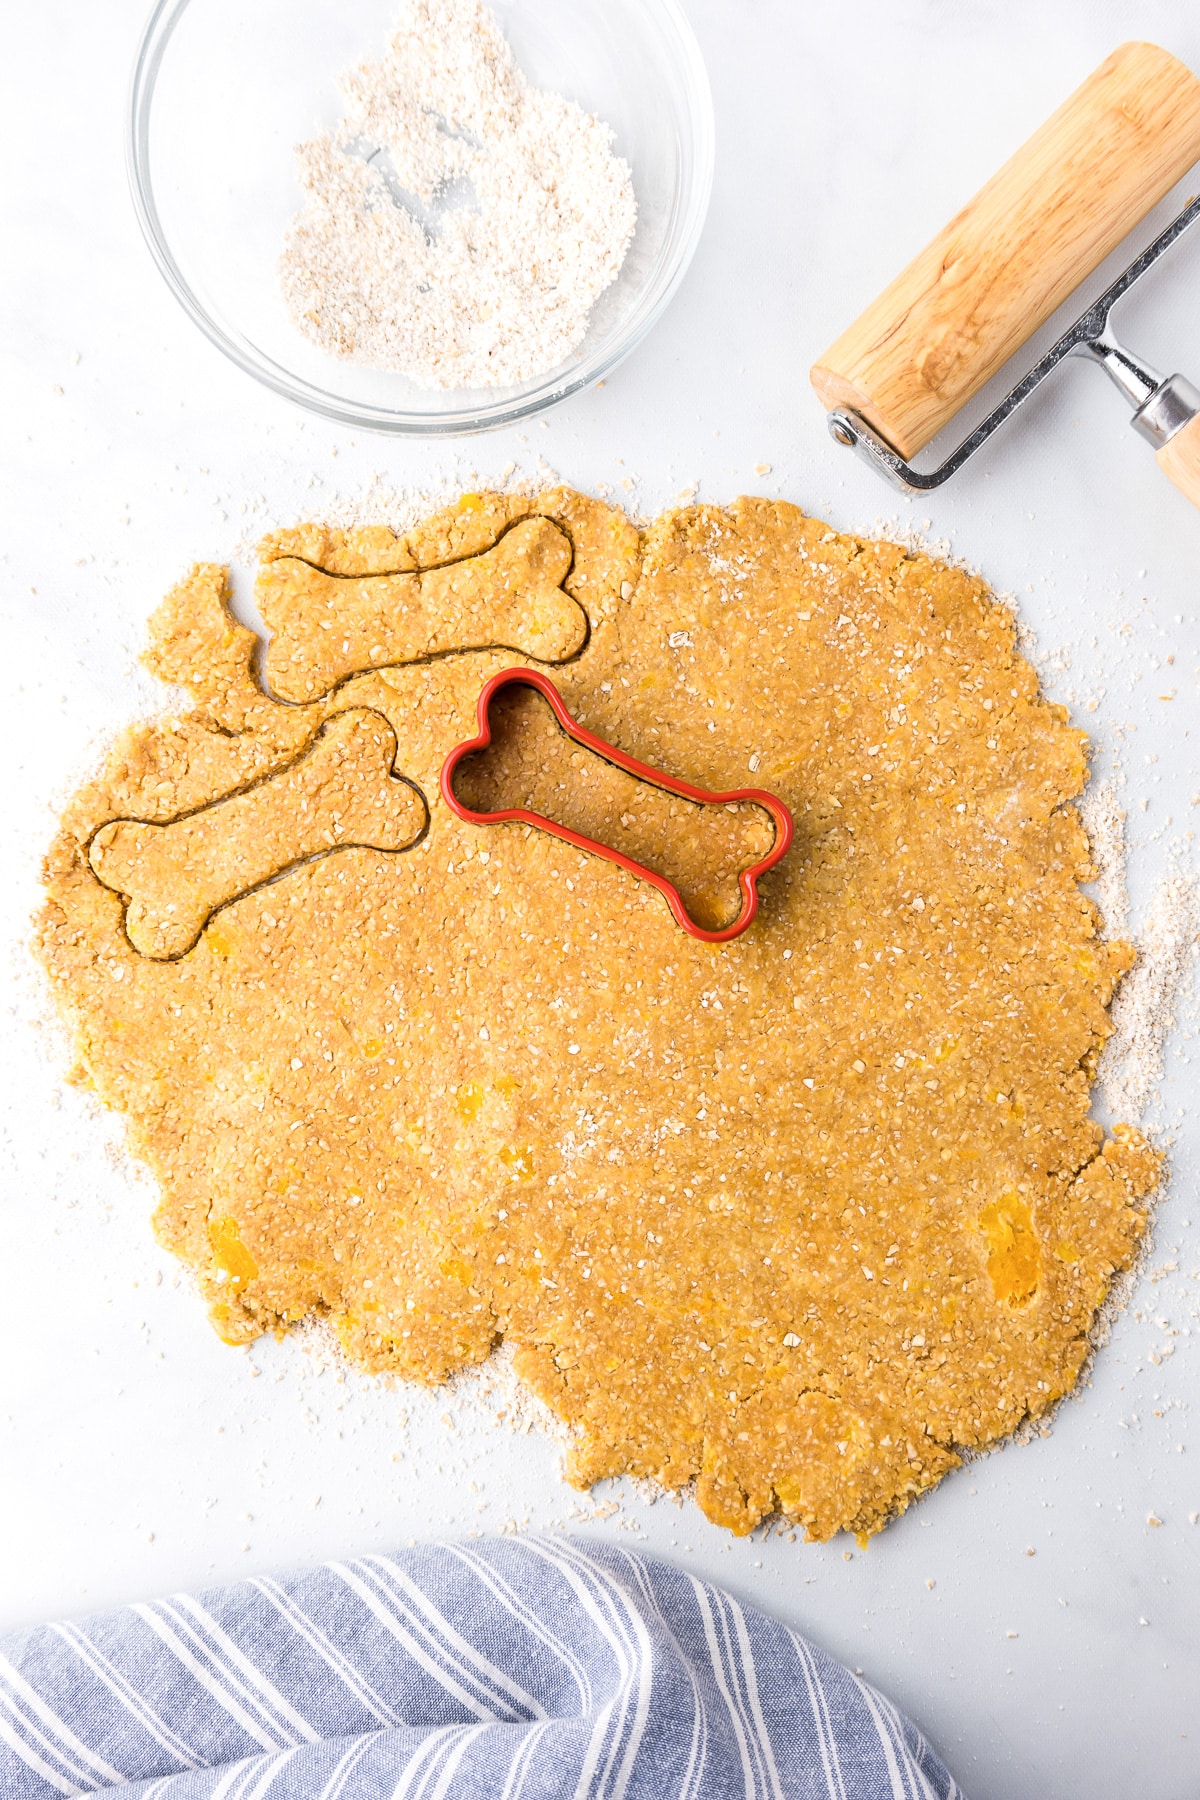 Bone shaped cookies being cut out from a peanut butter dough with a rolling pin and a bowl of pulsed oats nearby.